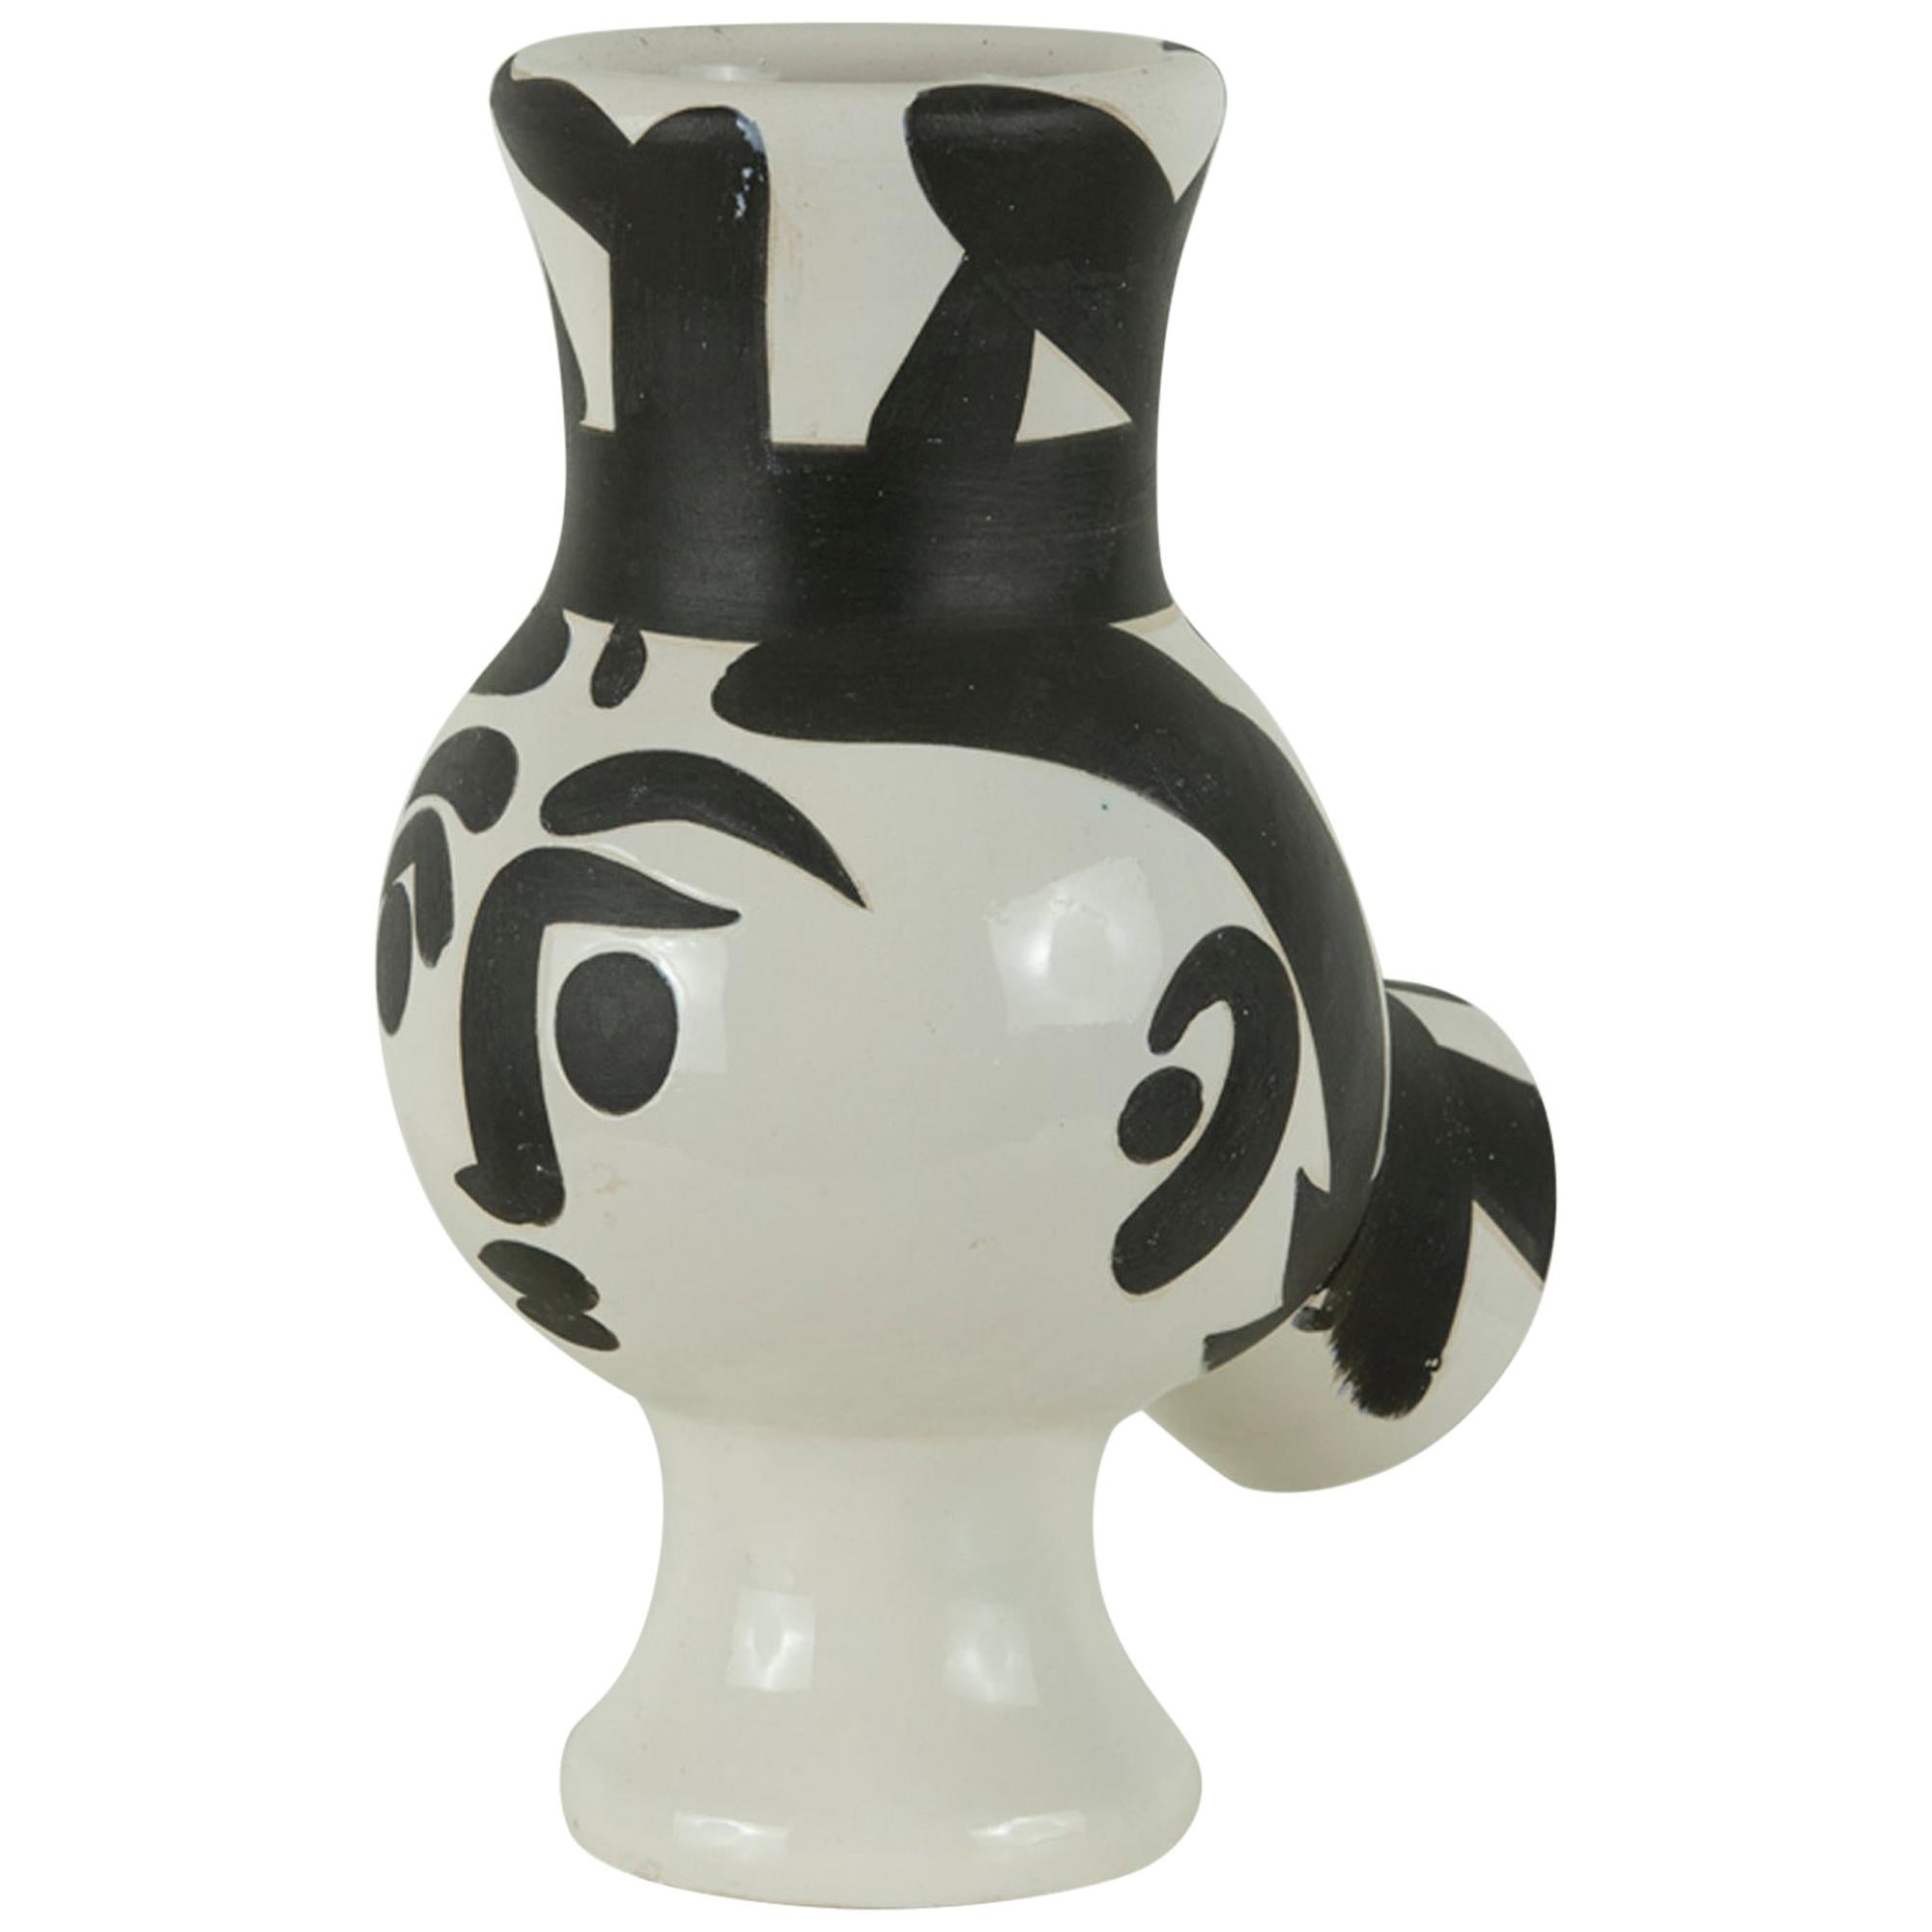 Picasso Ceramic Pitcher "Chouette Femme" by Madoura For Sale